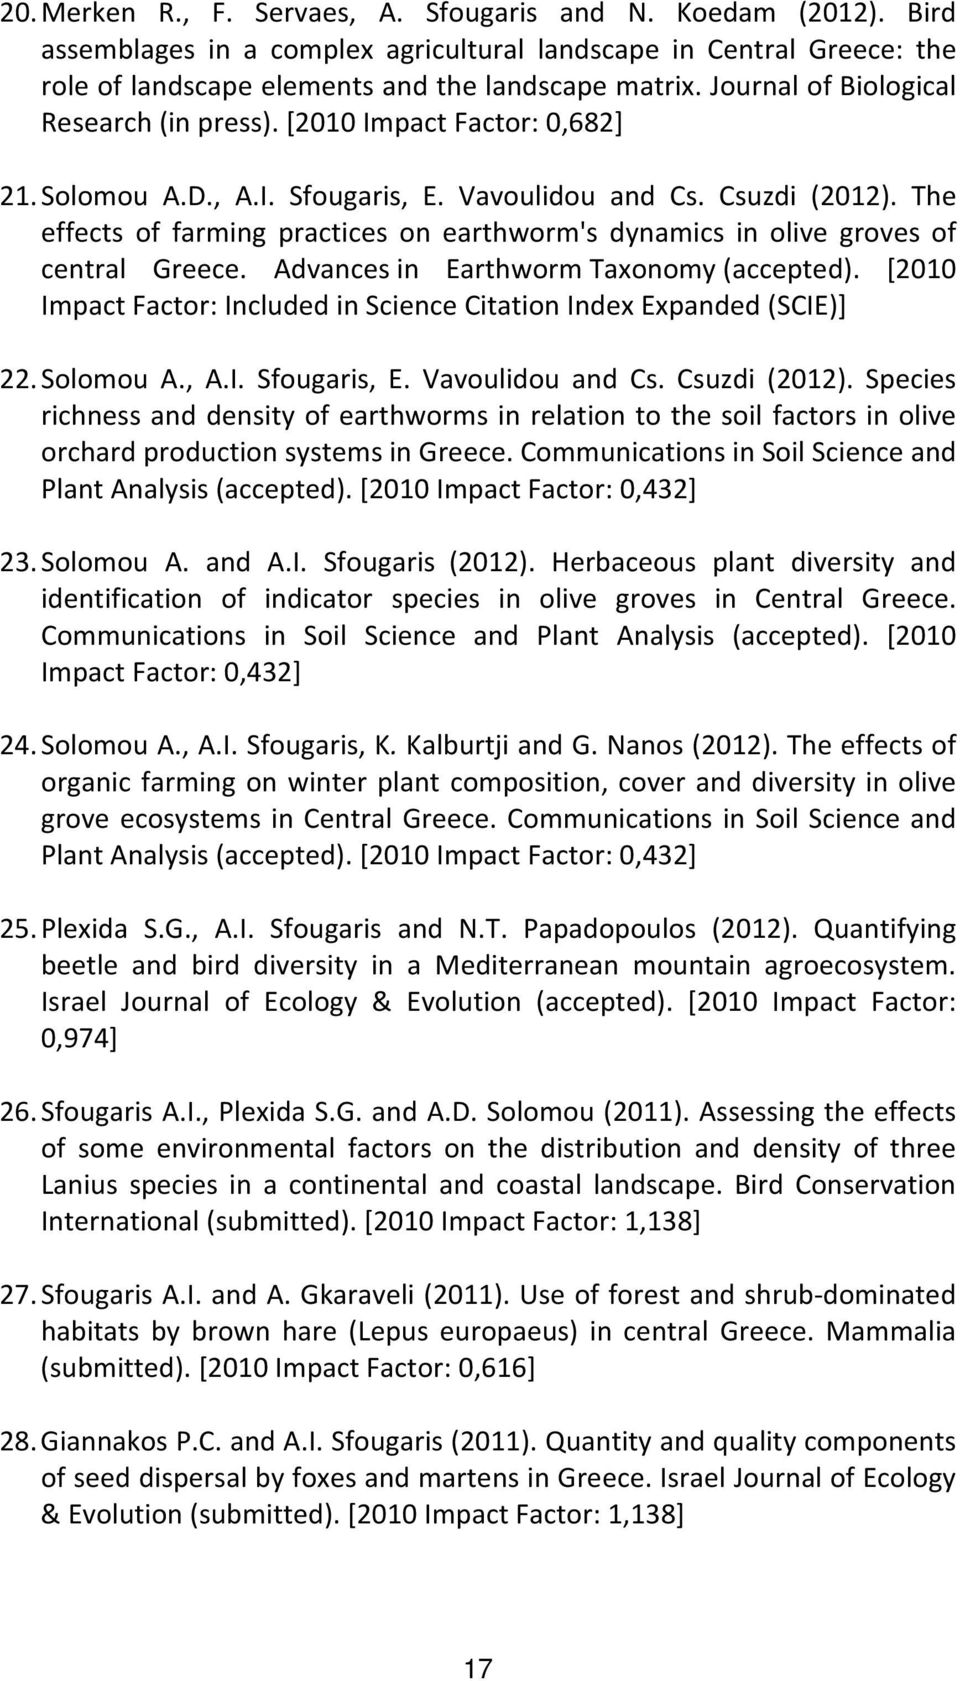 The effects of farming practices on earthworm's dynamics in olive groves of central Greece. Advances in Earthworm Taxonomy (accepted).